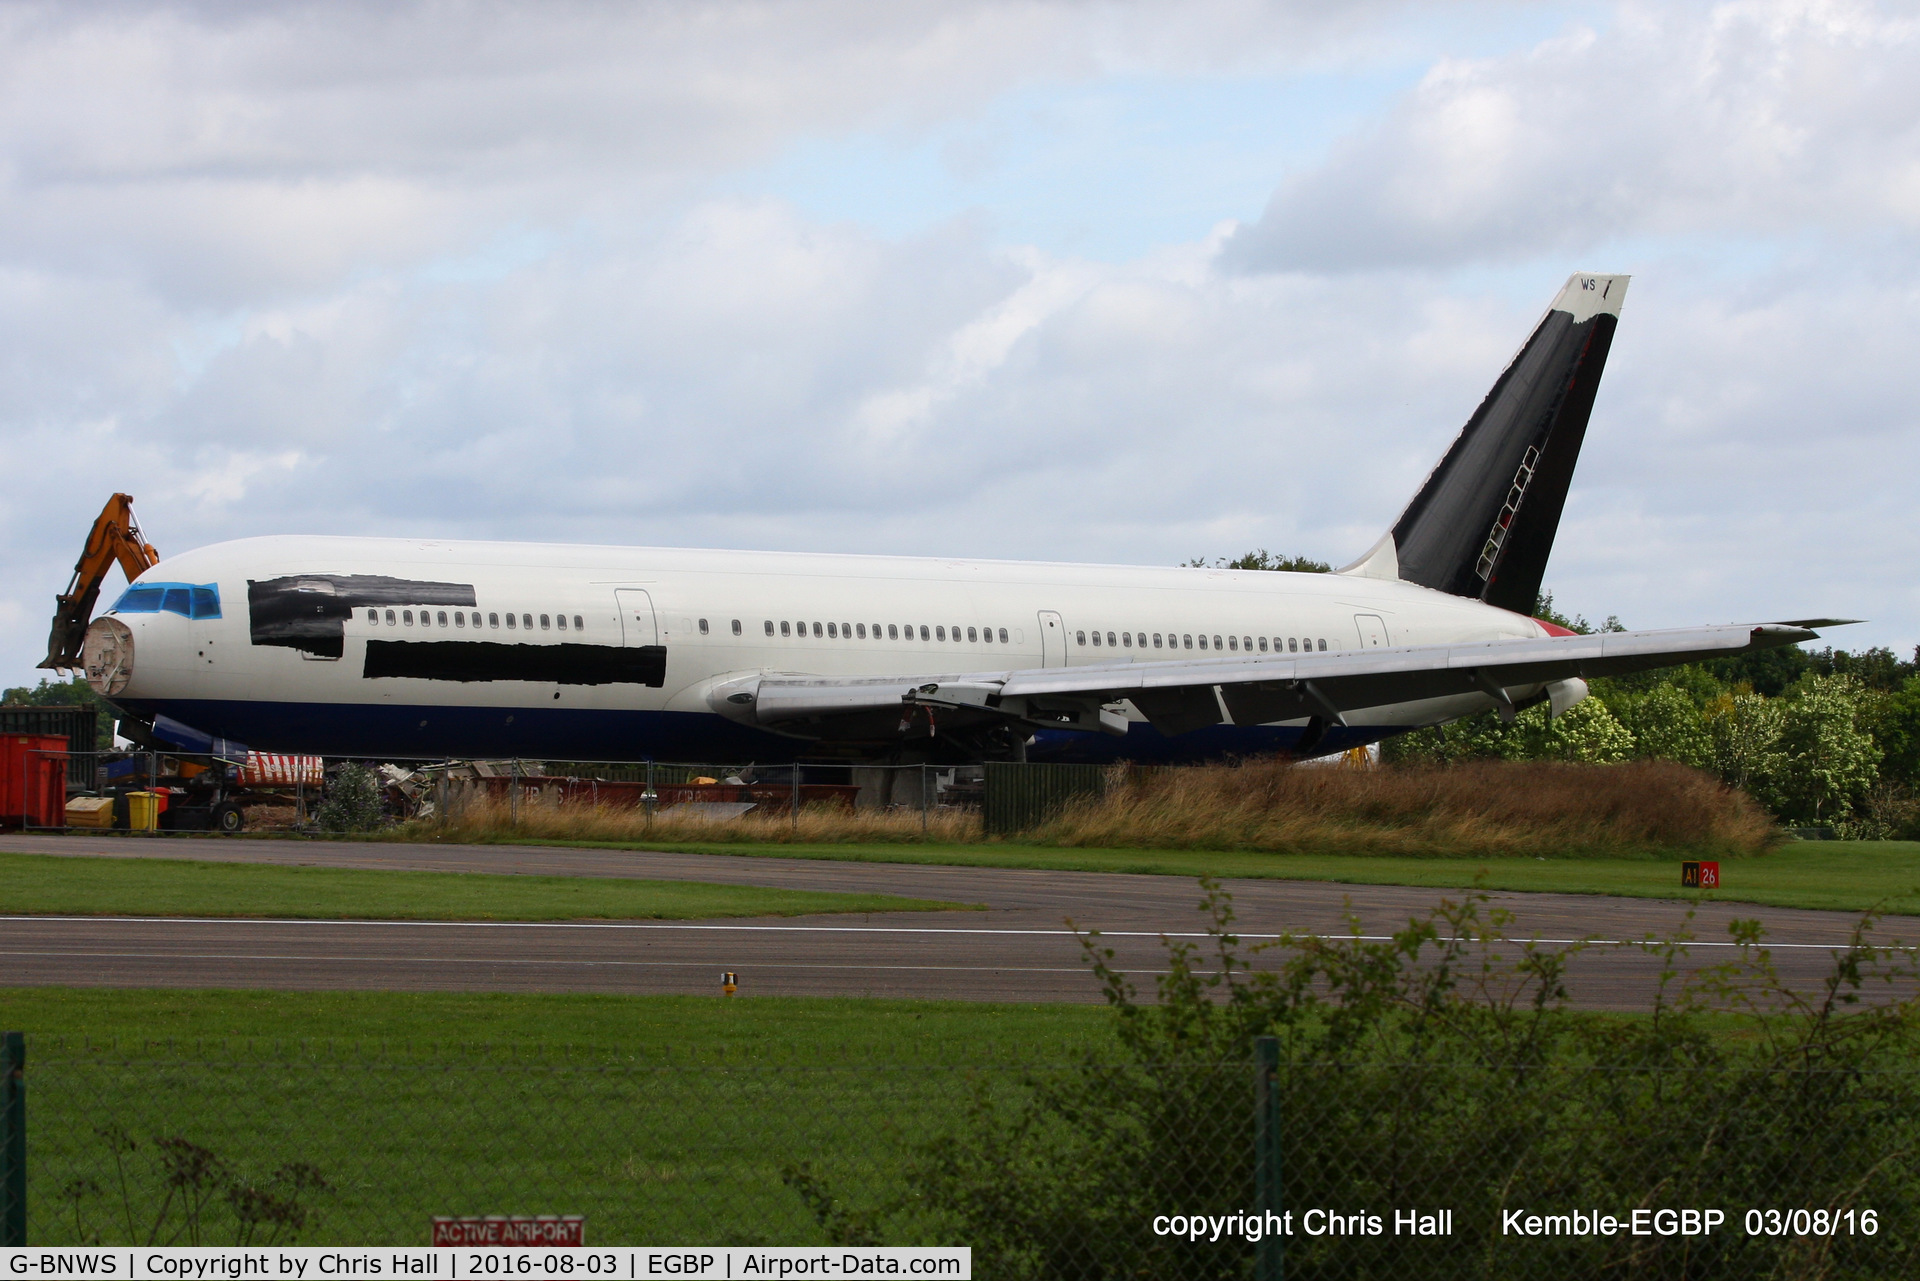 G-BNWS, 1992 Boeing 767-336 C/N 25826, in the scrapping area at Kemble